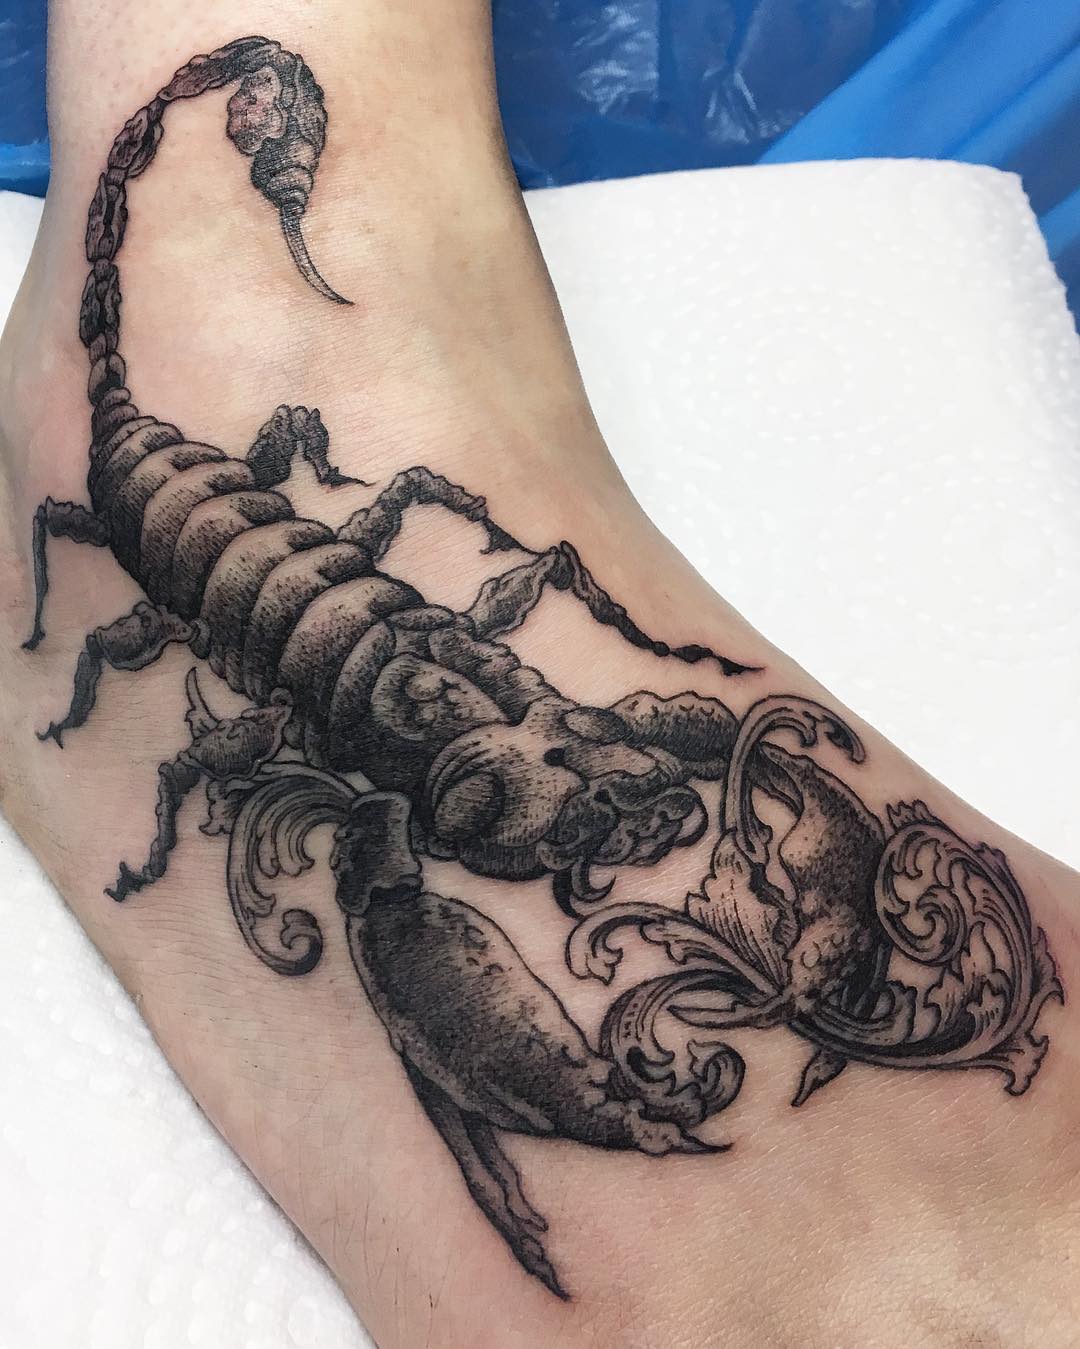 scorpion tattoograving get in touch with some scrollornamentic,
#stuckinthepastt